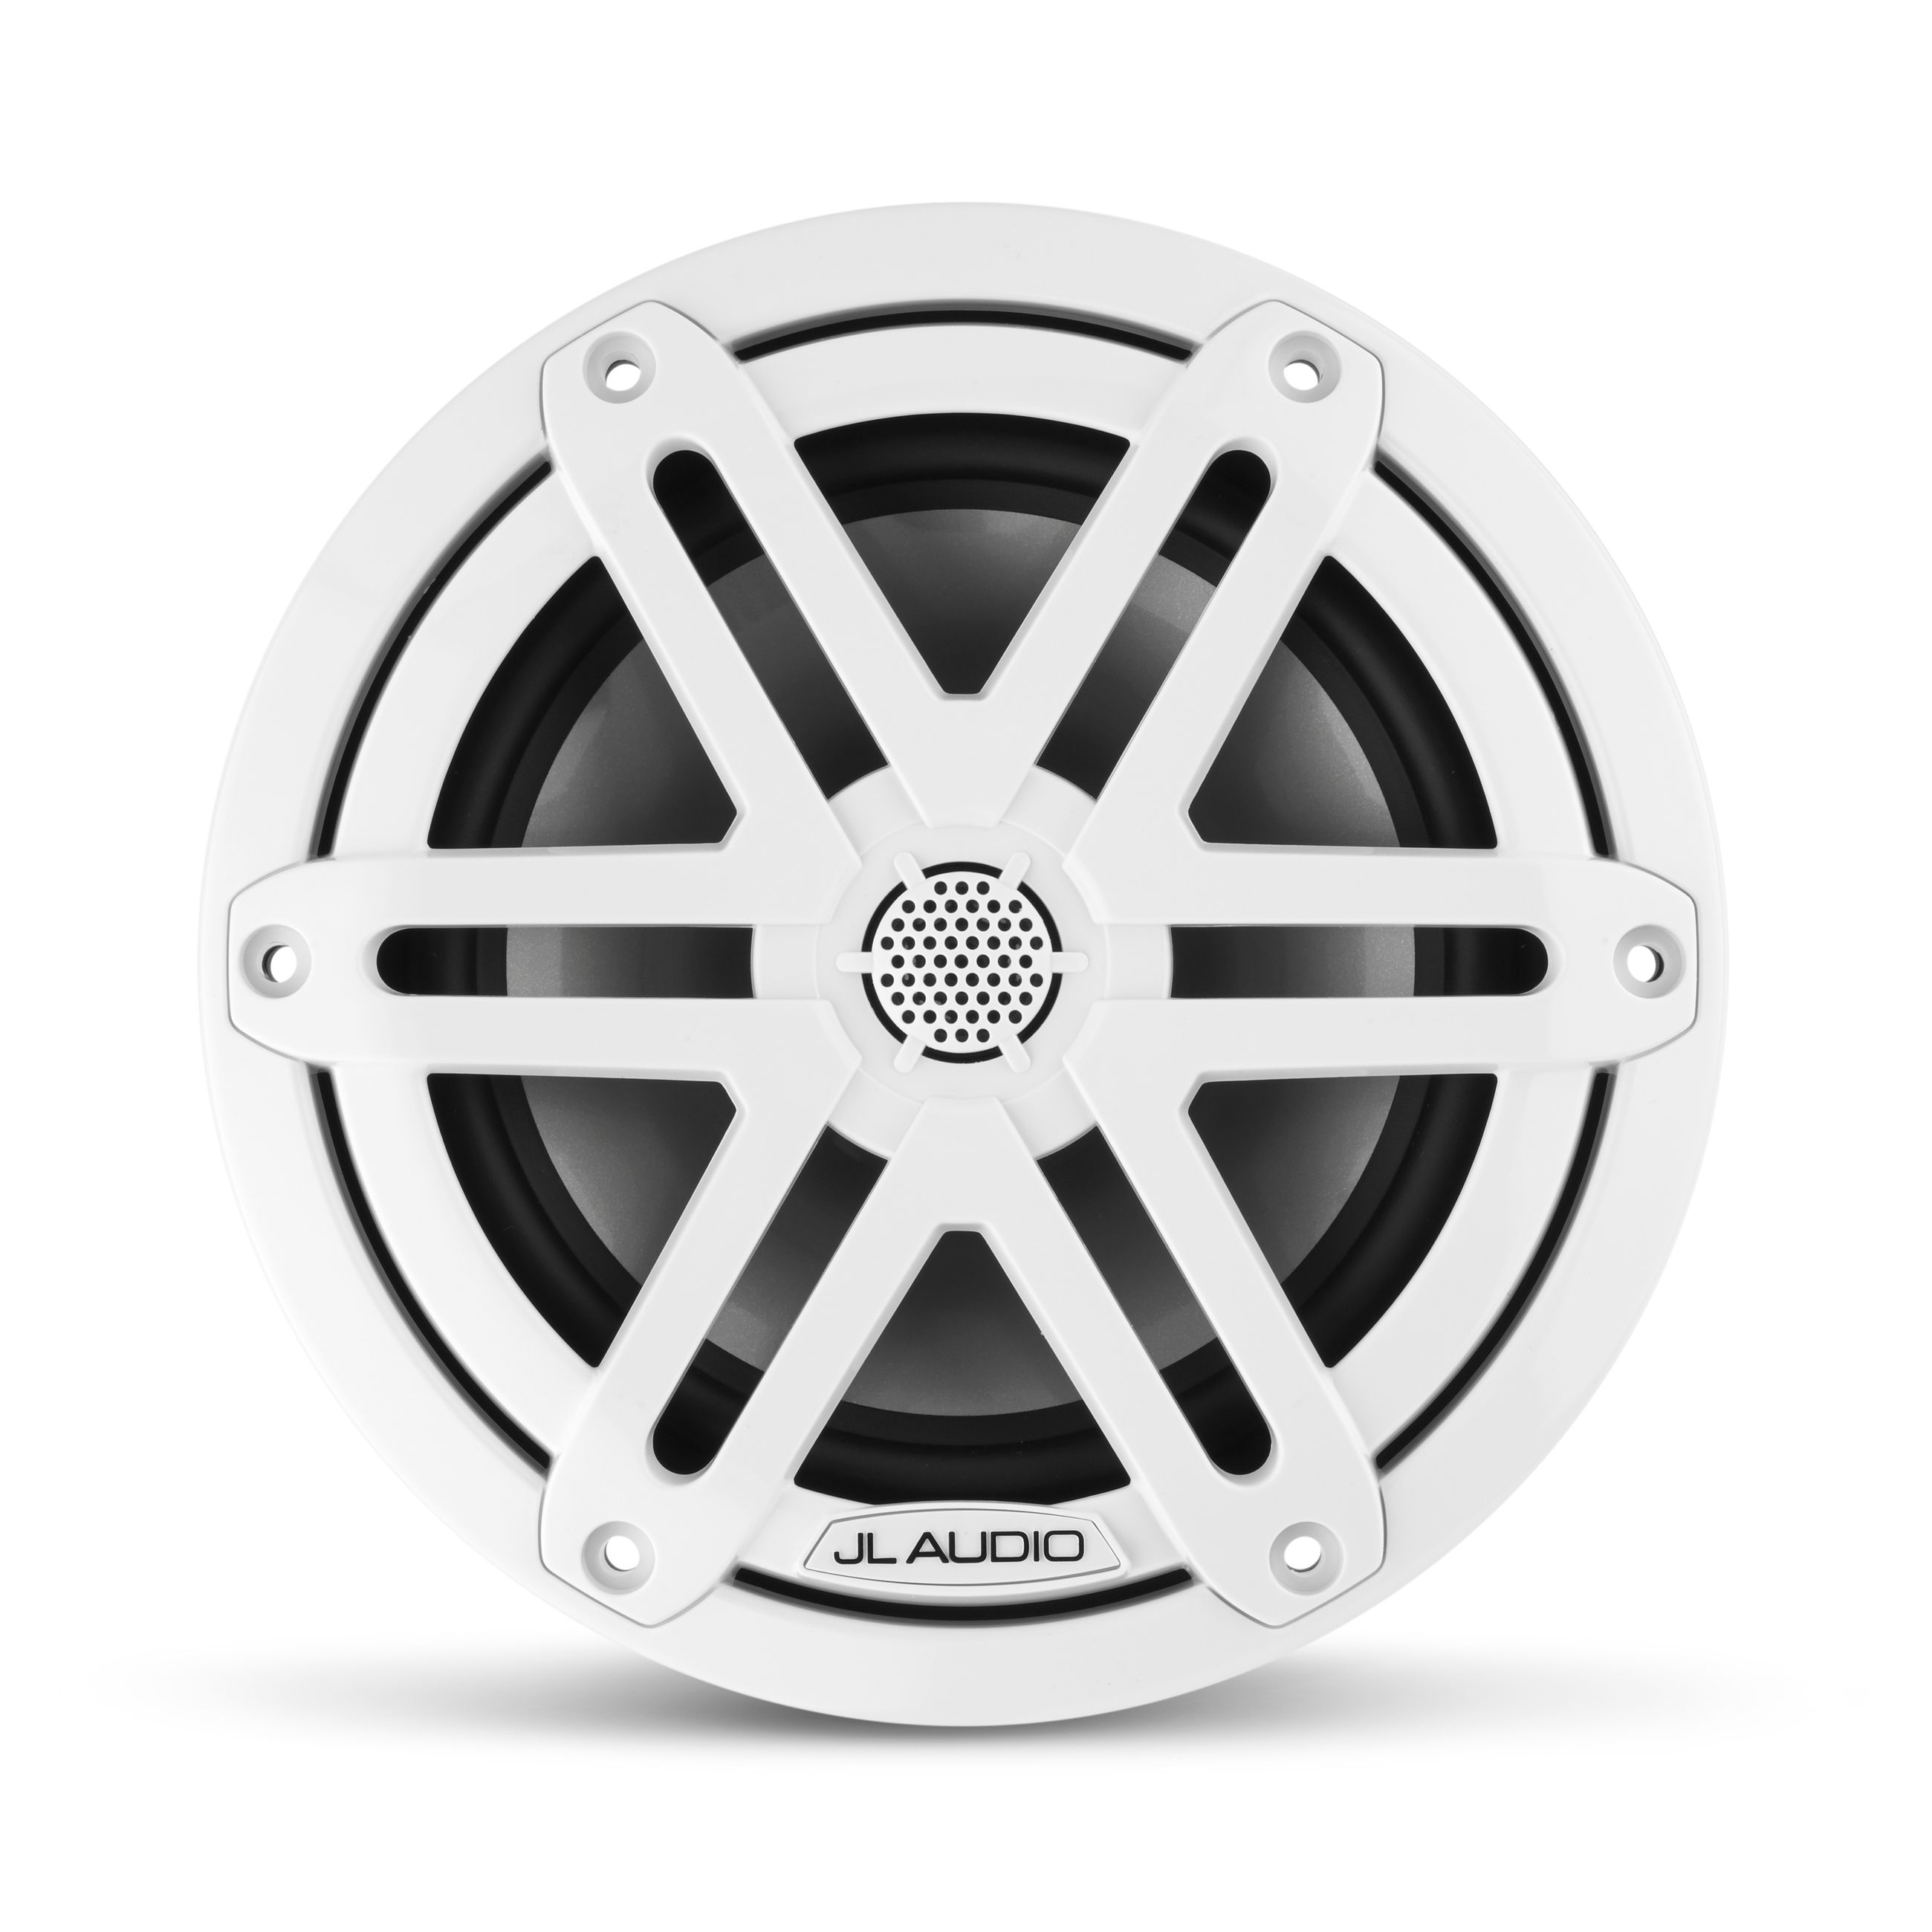 Overview image of a JL Audio M3 speaker.